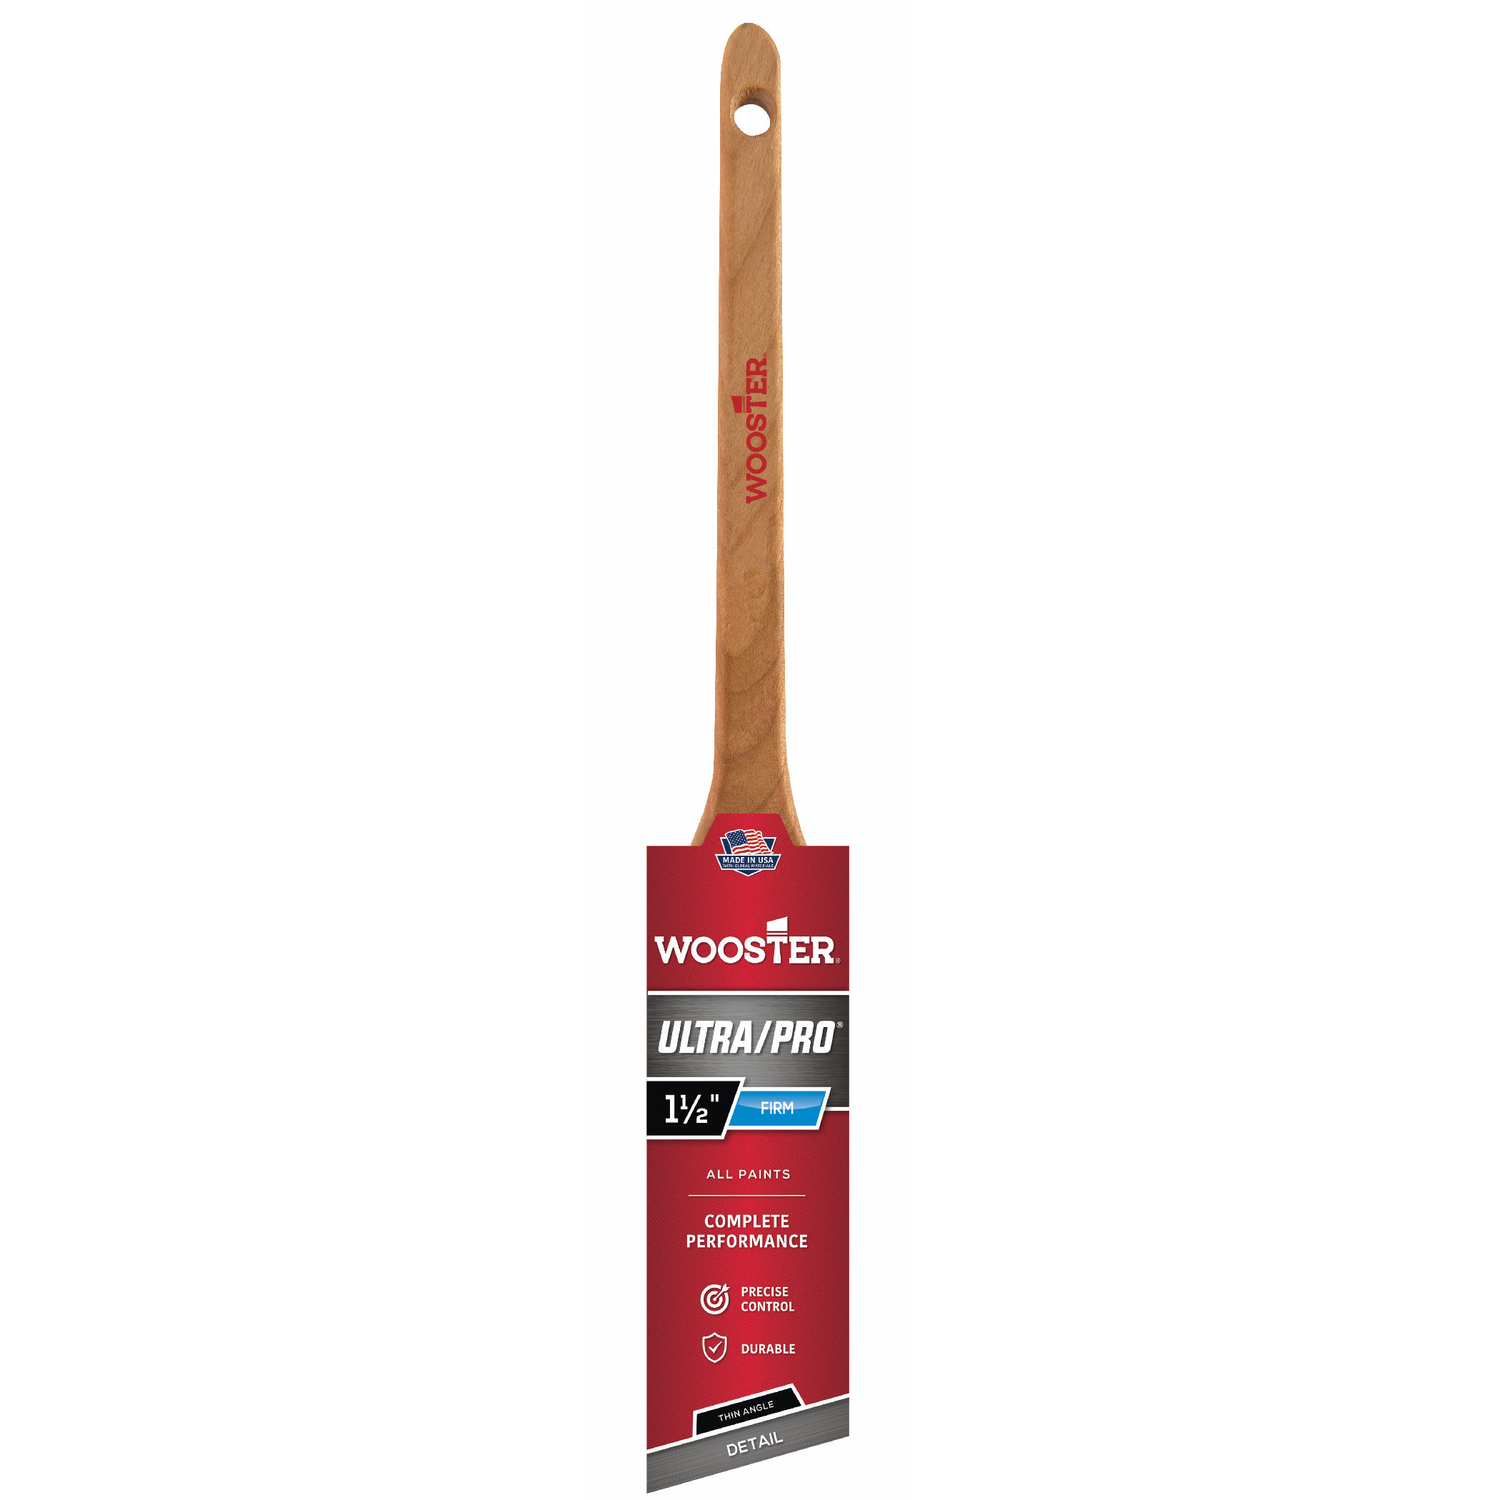 Photos - Putty Knife / Painting Tool Wooster Ultra/Pro 1-1/2 in. Firm Angle Paint Brush 4181-1.5